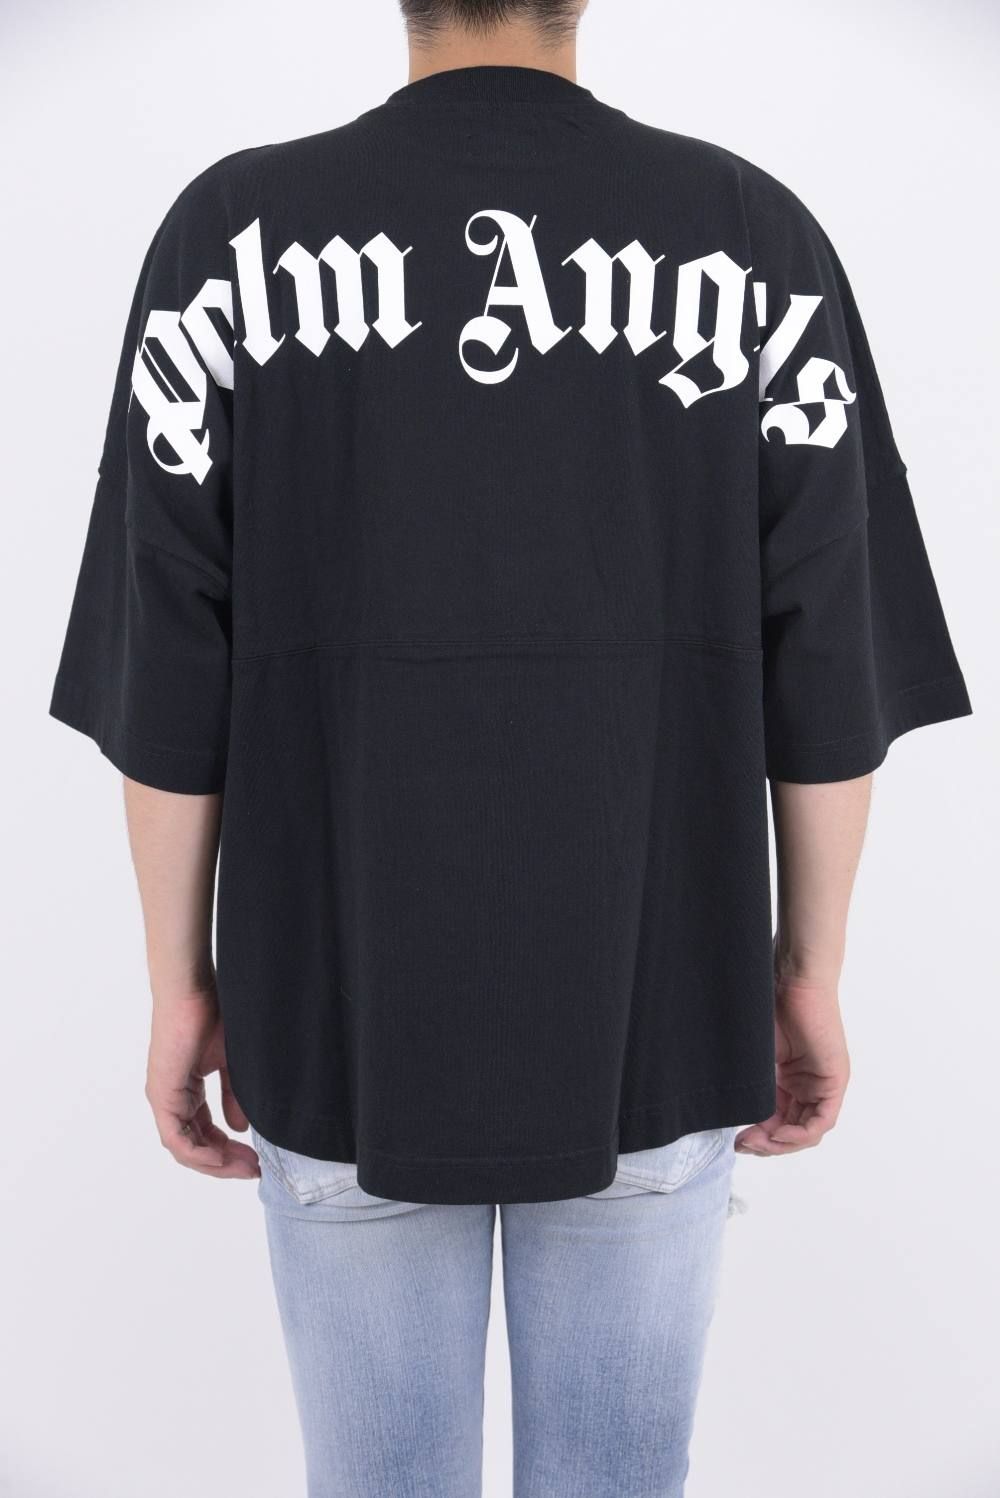 PALM ANGELS - LOGO OVER TEE BLACK / プリント クルーネック 